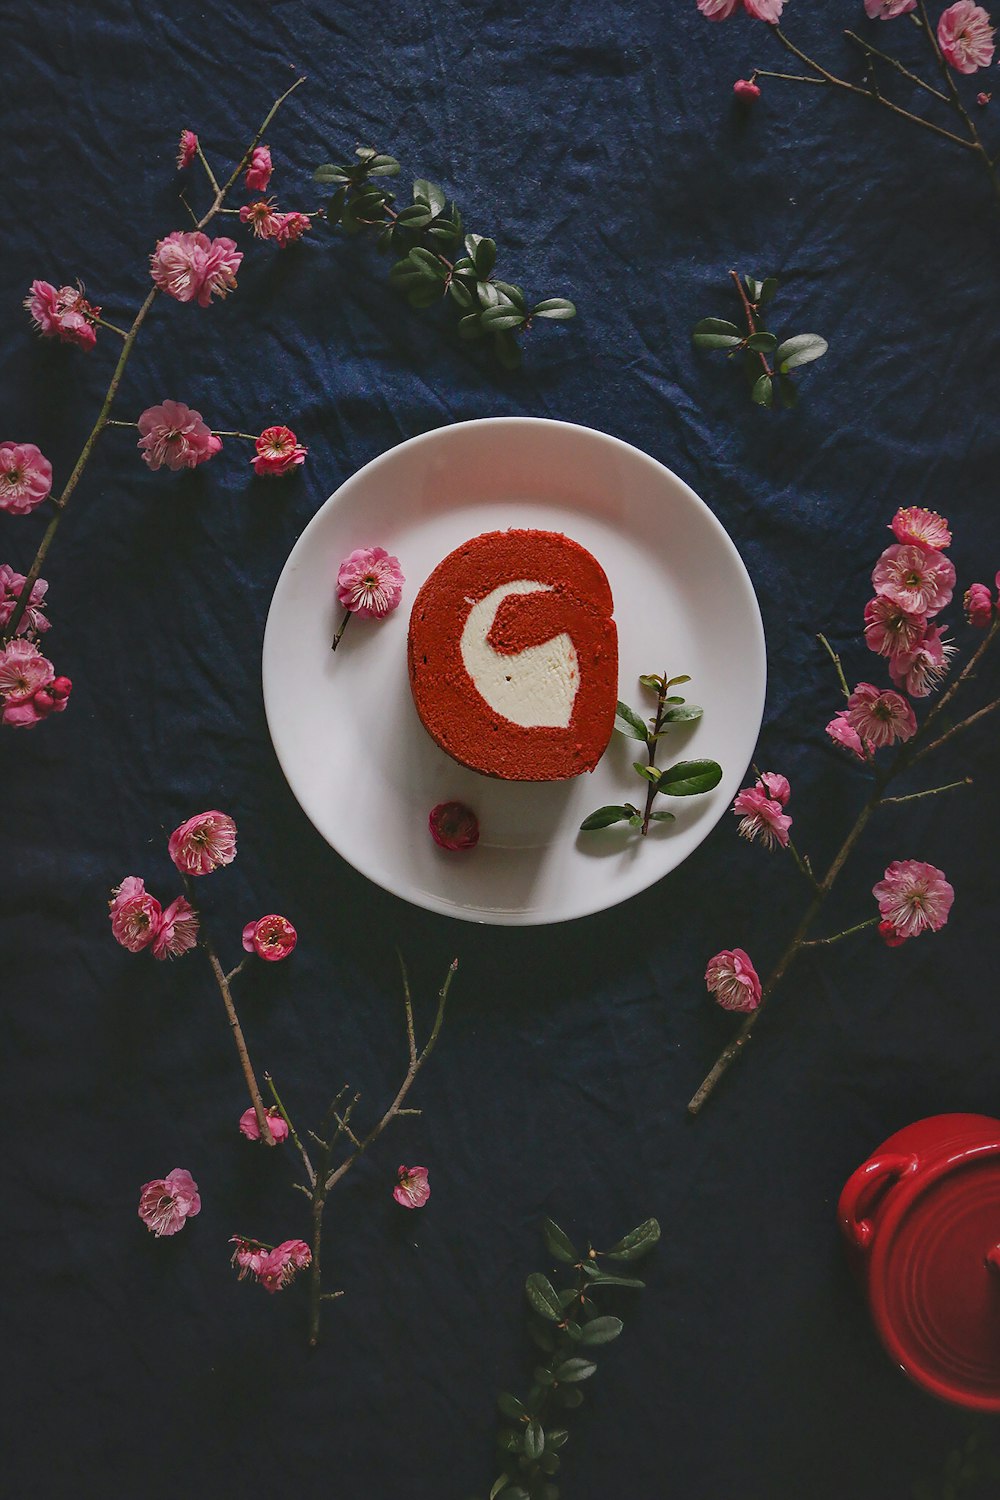 slice of cake on saucer on blue textile surrounded with flowers